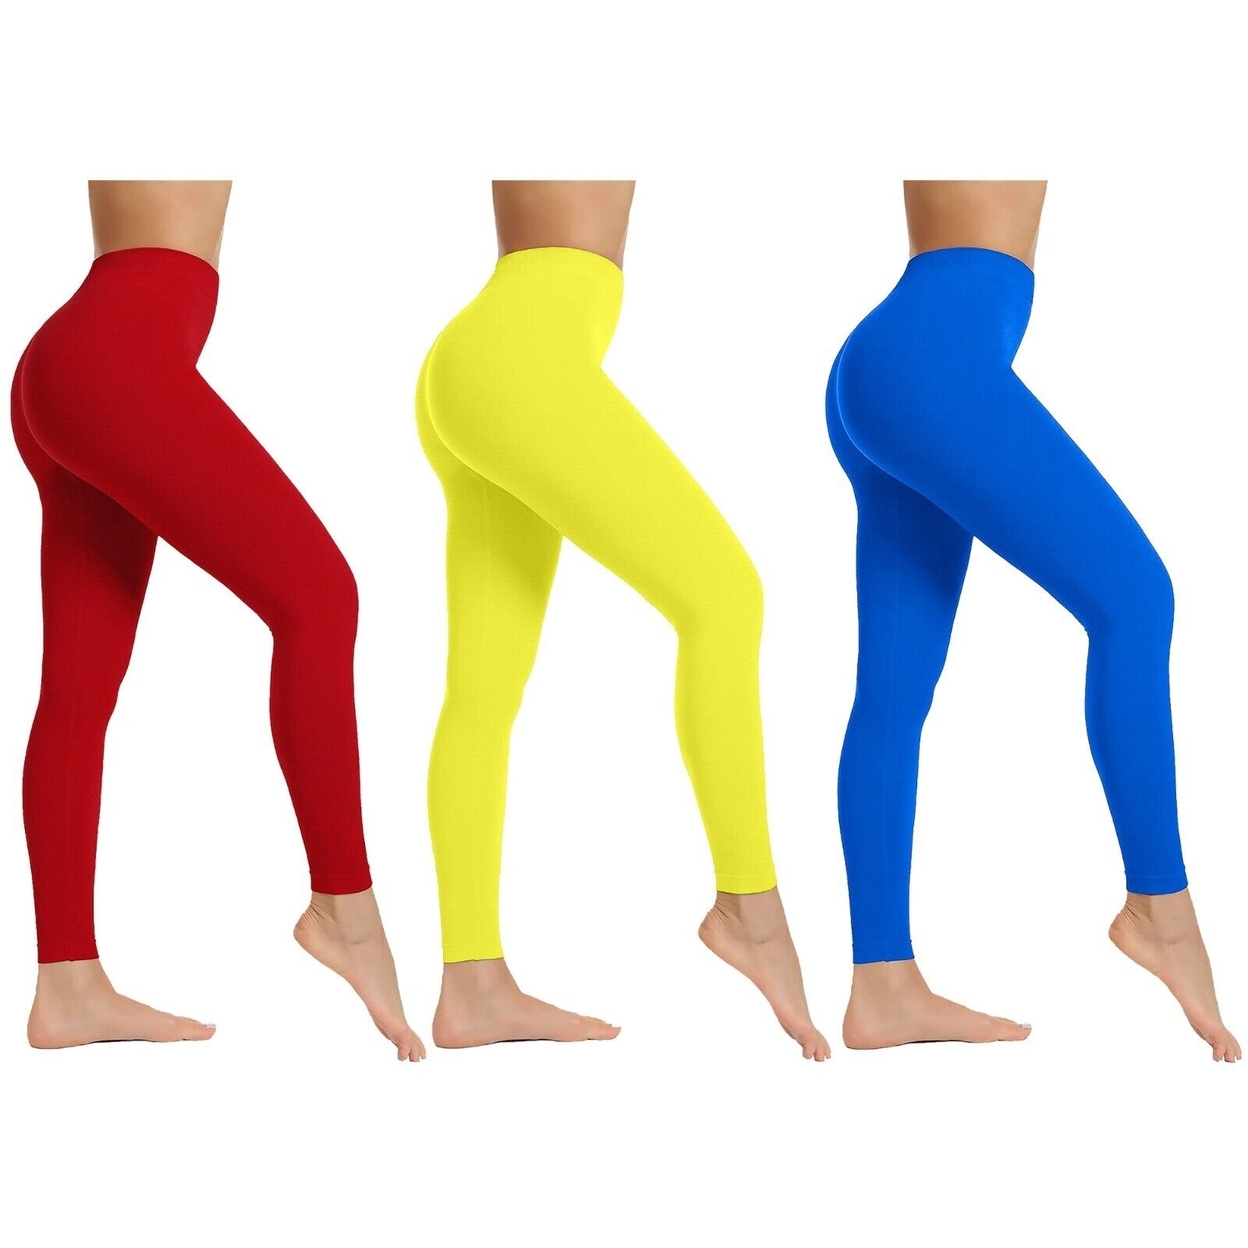 Women's High Waist Super-Soft Active Athlete Stretch Yoga Cozy Leggings - Red, Small